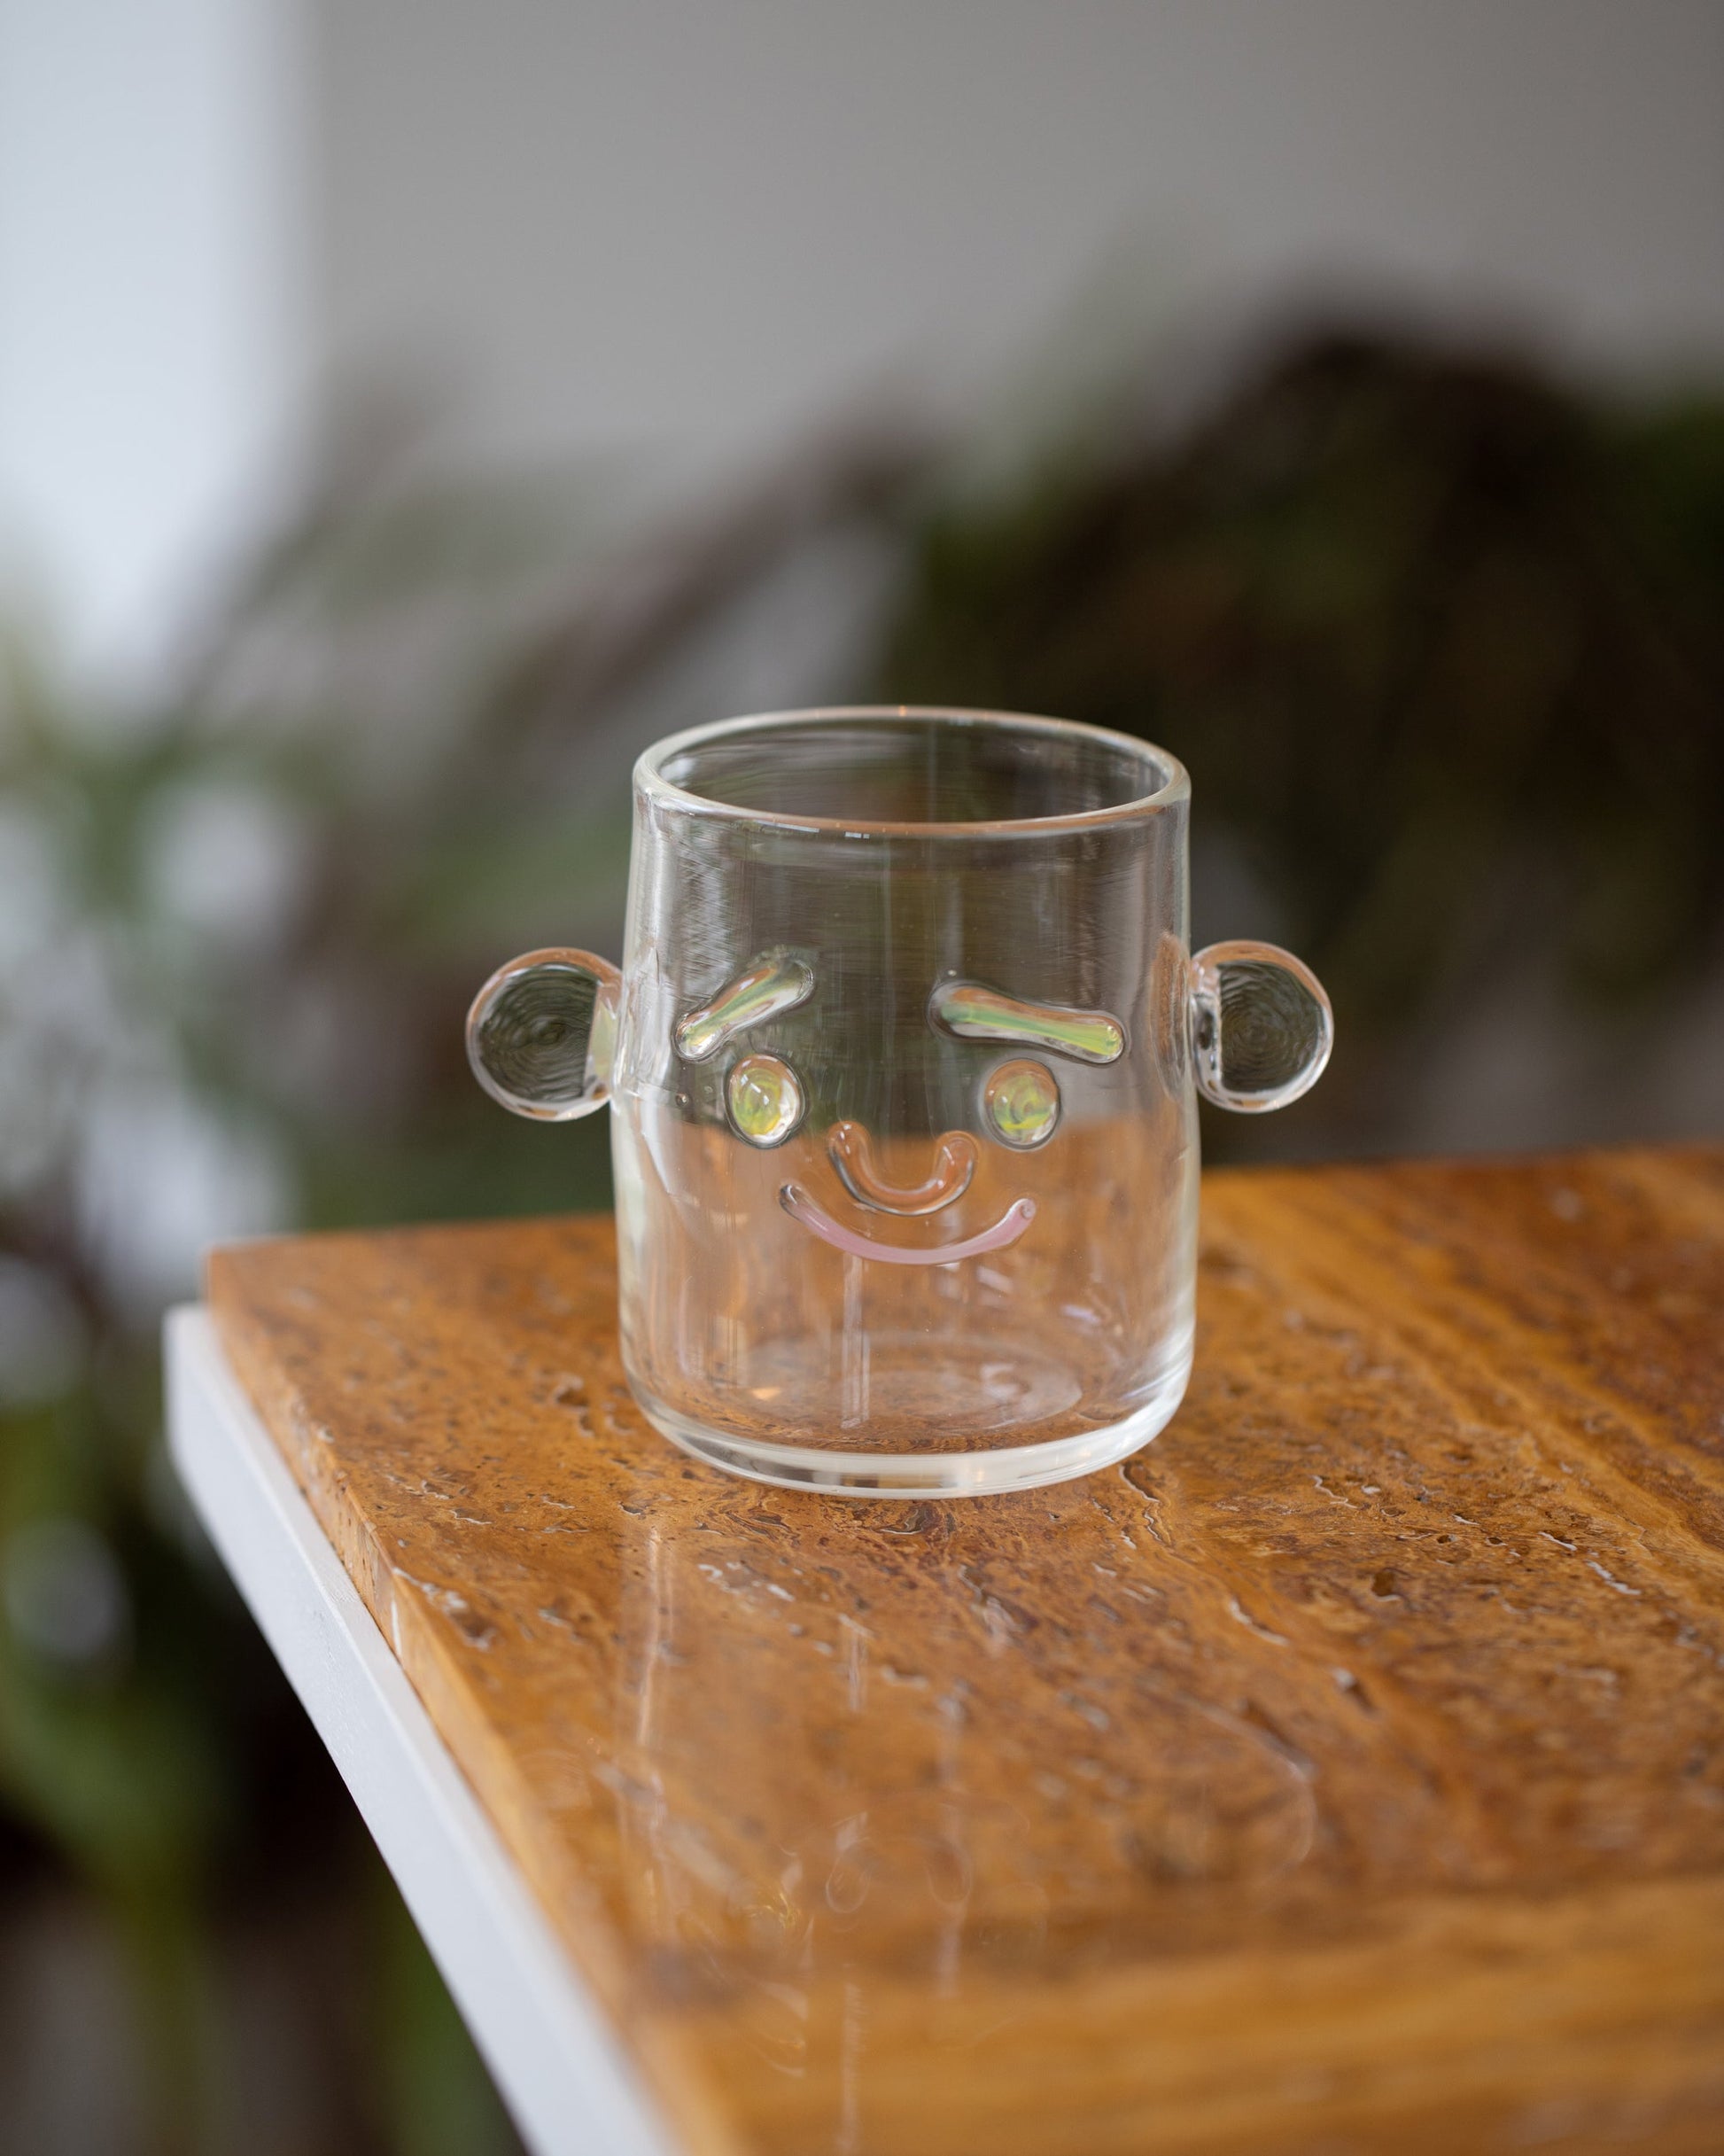 Styled image featuring the TAK TAK Goods Smiley Face Cup.